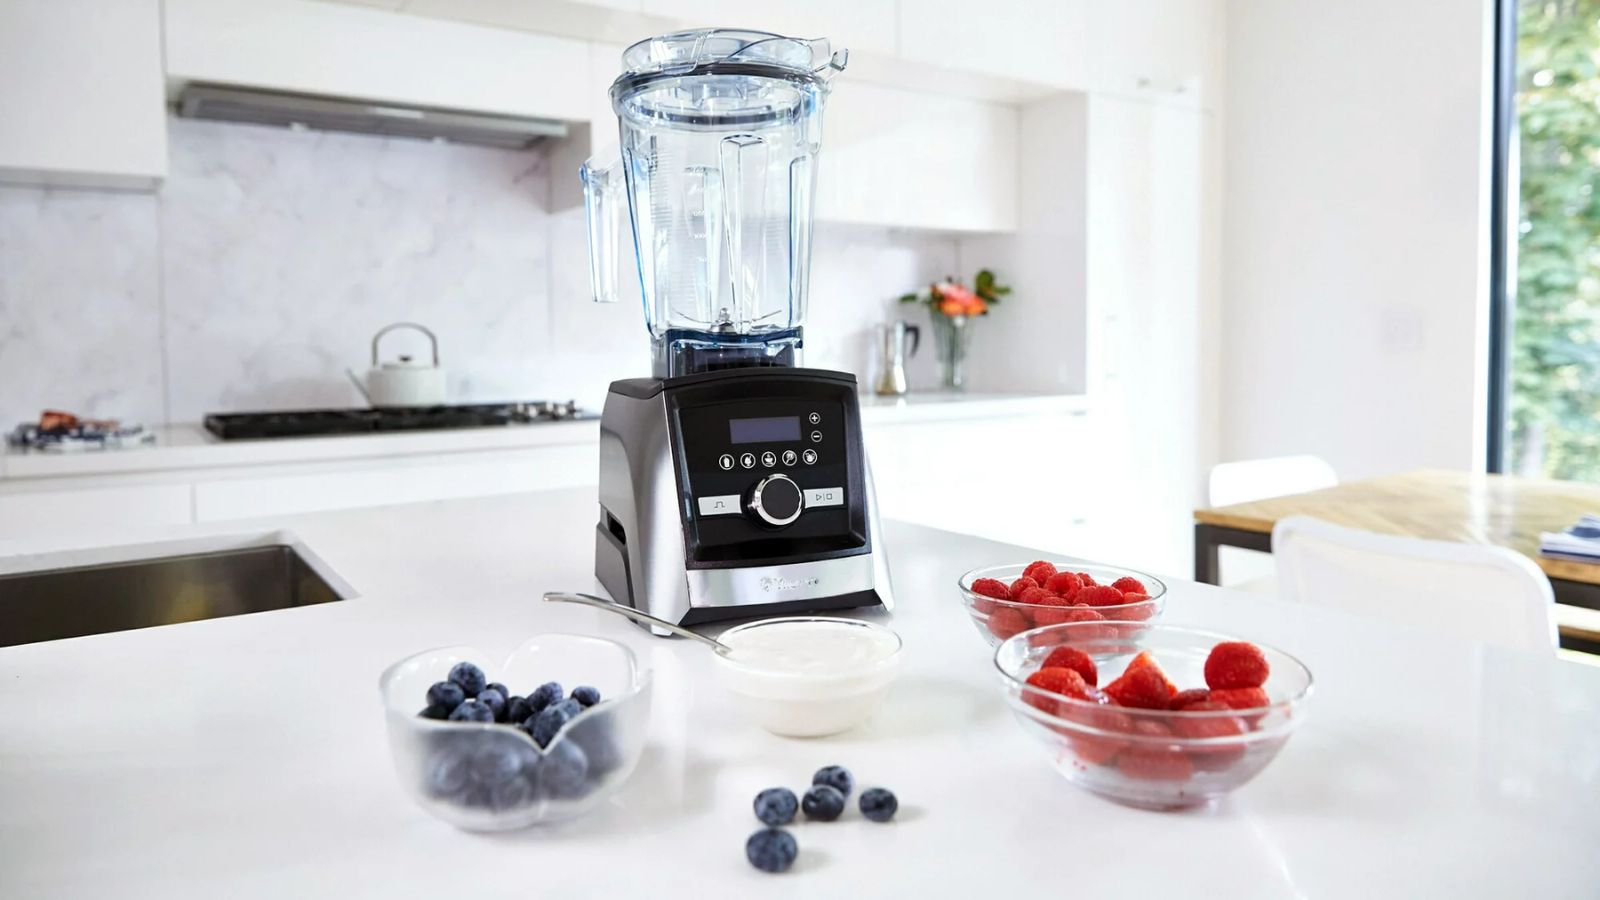 Cooks Professional Nutriblend Smoothie Maker, 1000W